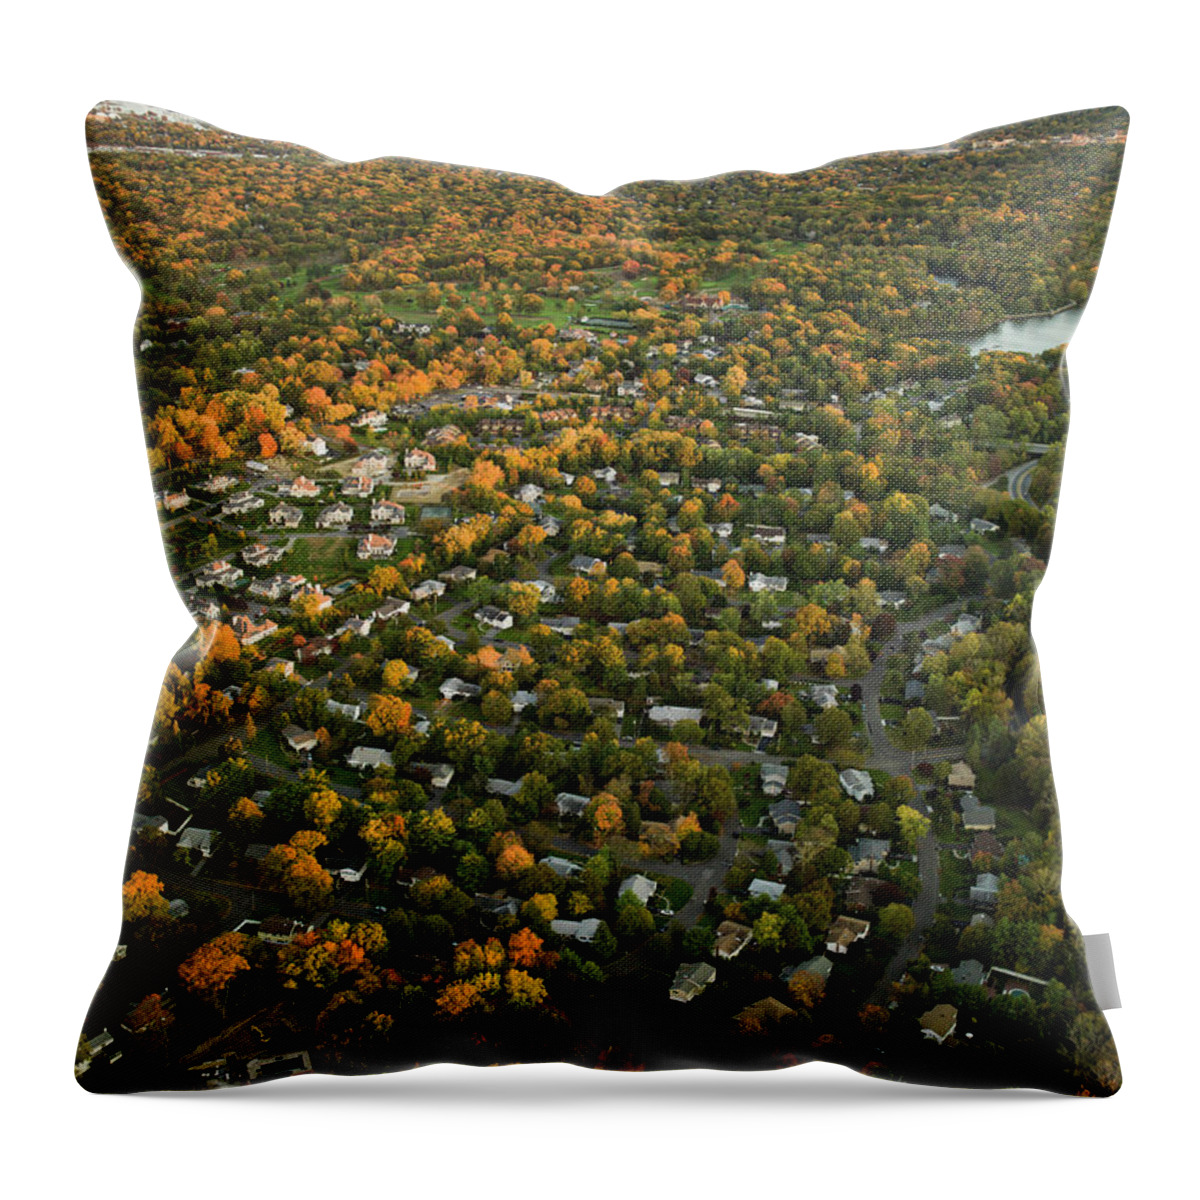 Scenics Throw Pillow featuring the photograph Aerial Photography Of Suburbs, Ny #2 by Michael H